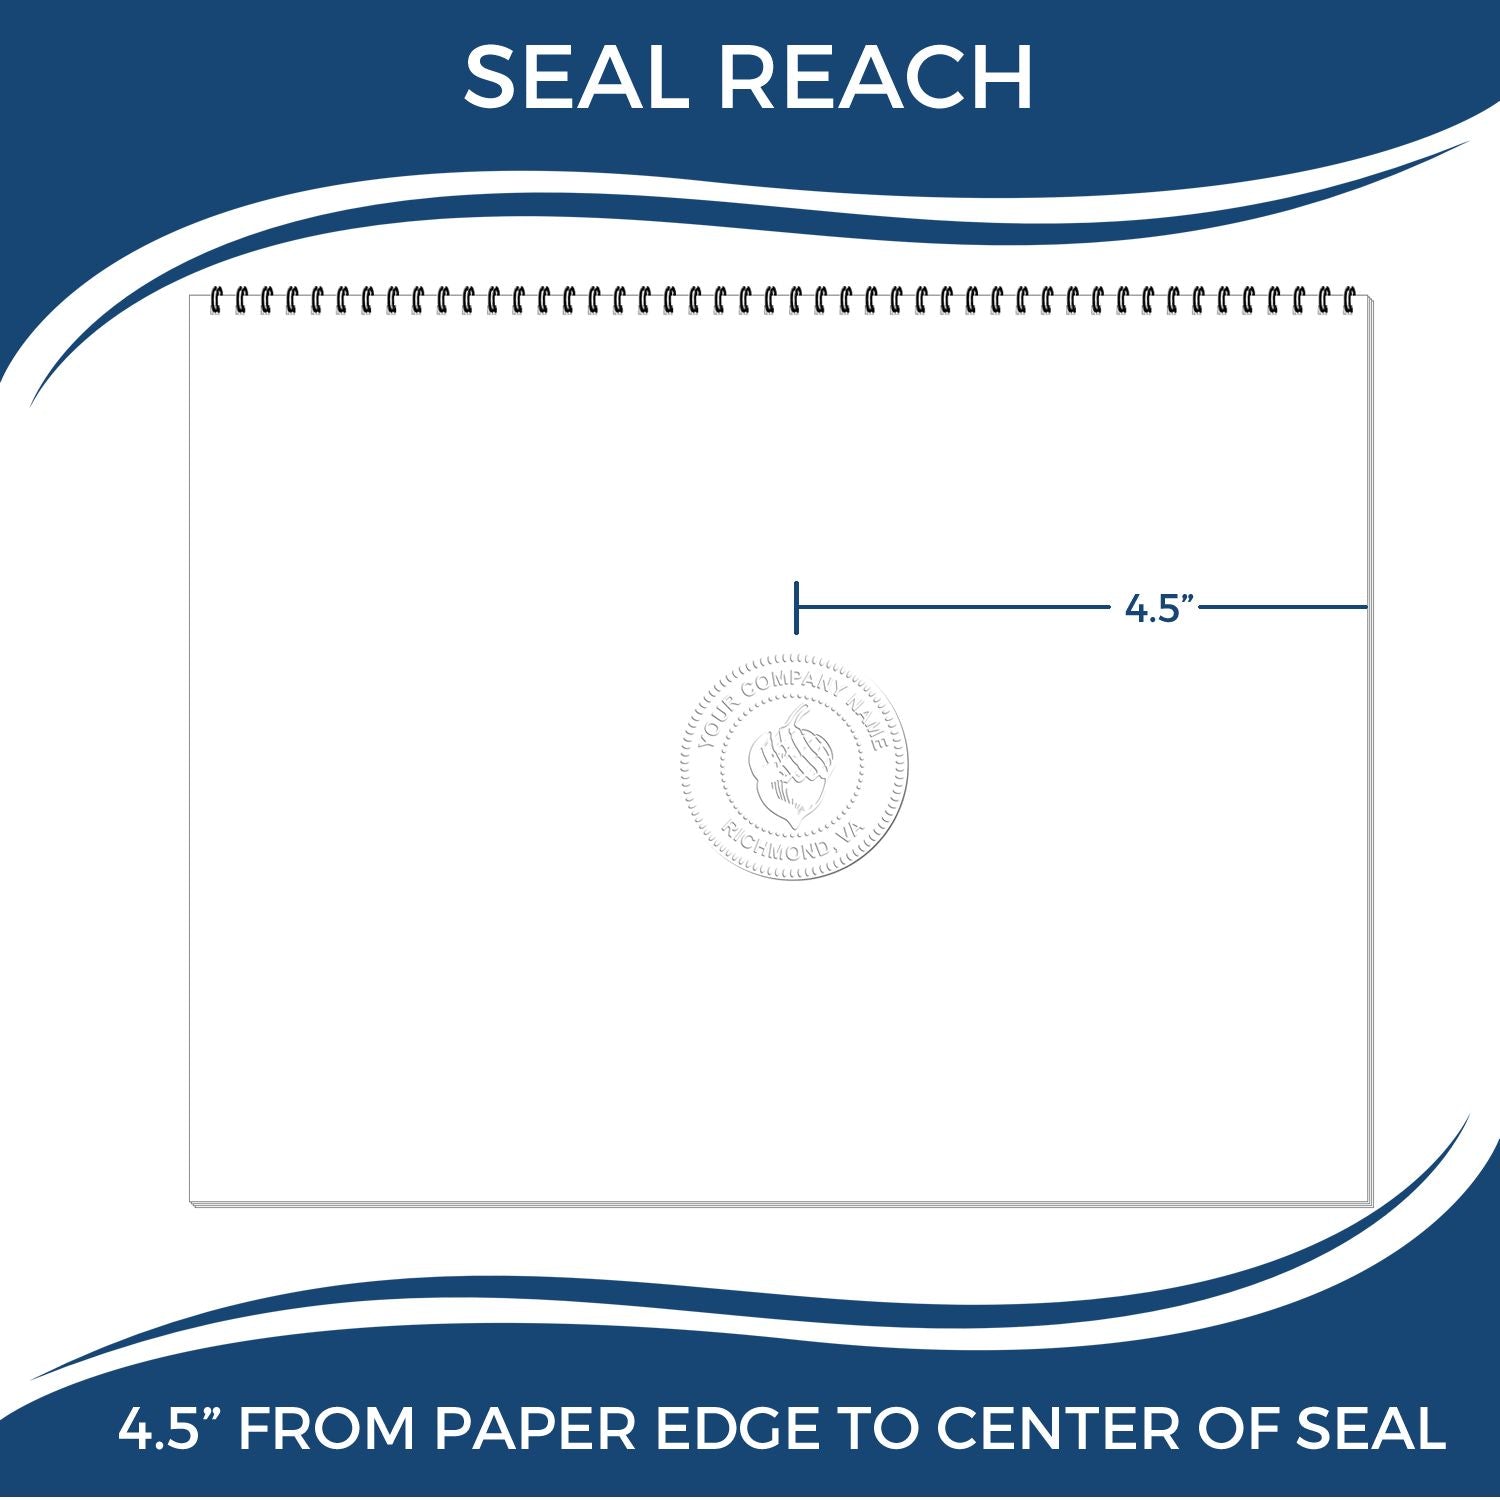 An infographic showing the seal reach which is represented by a ruler and a miniature seal image of the State of Arizona Extended Long Reach Engineer Seal